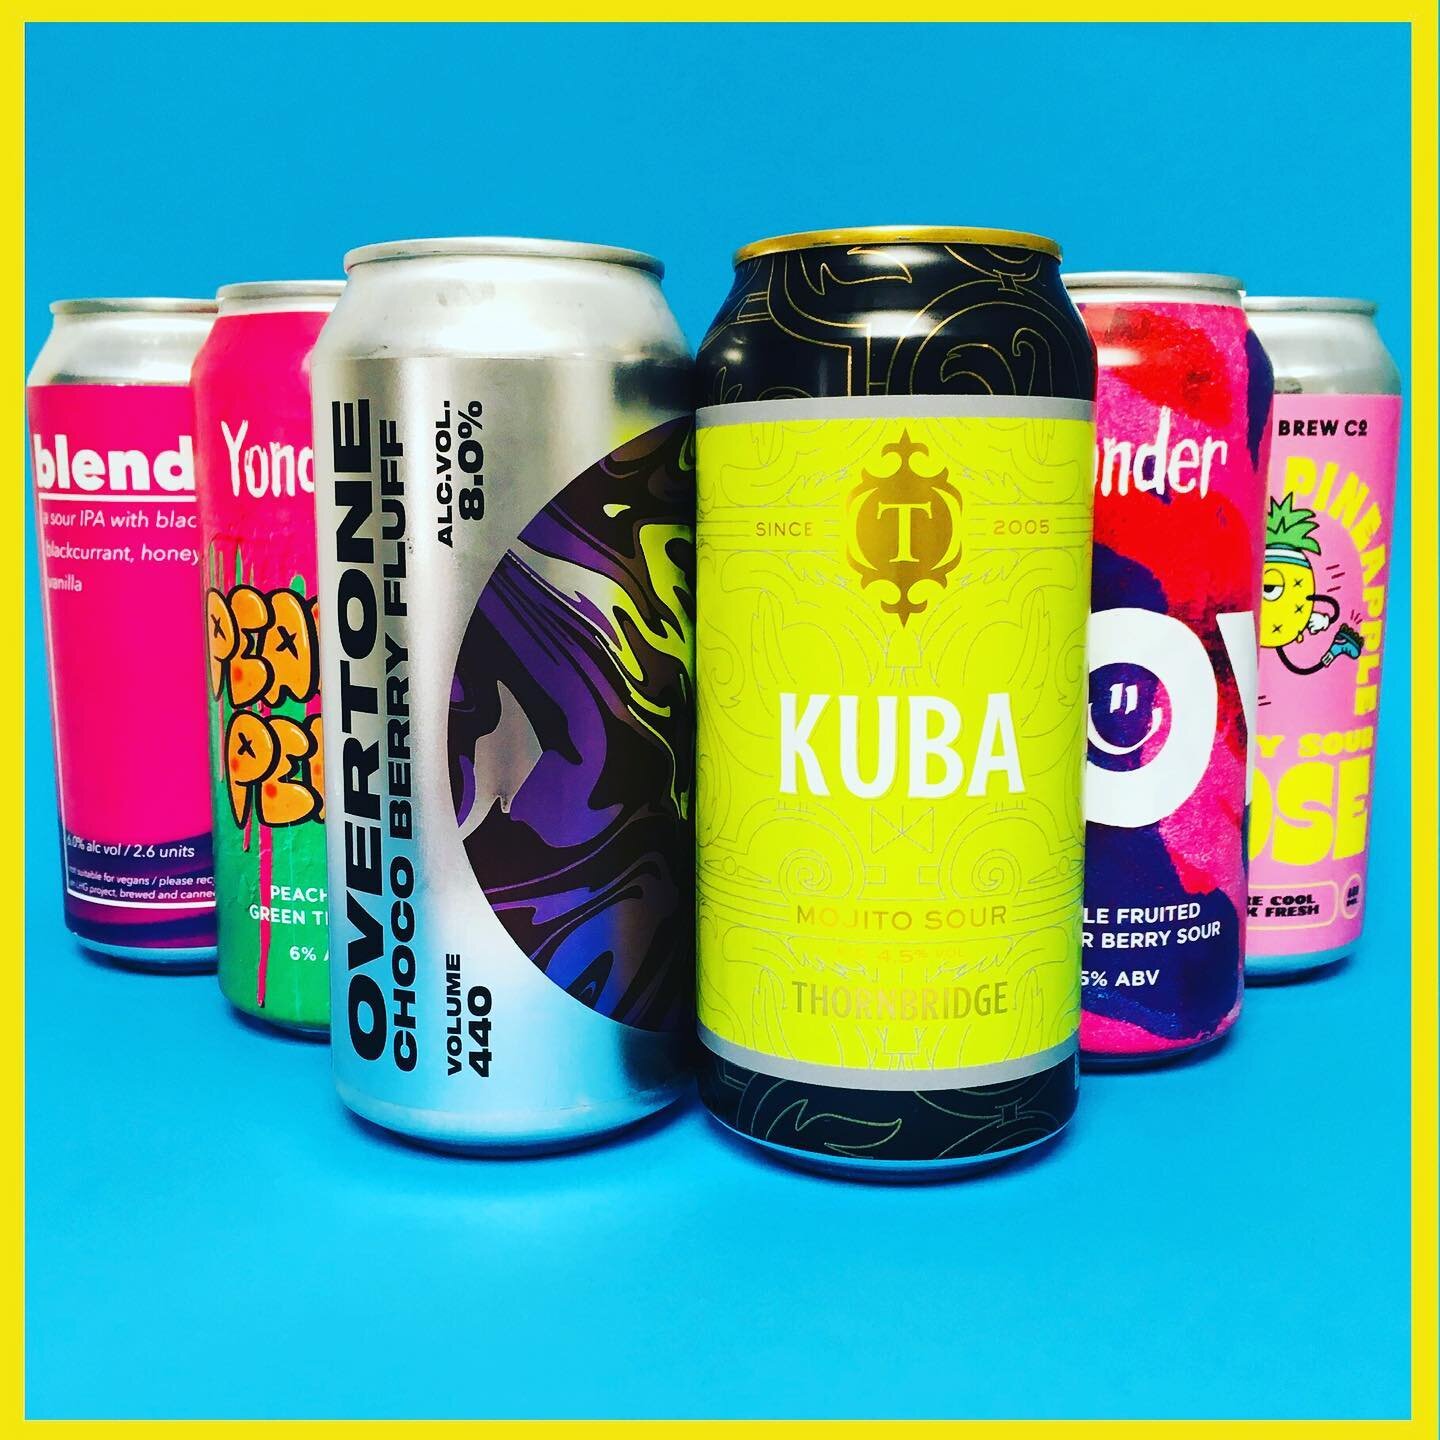 Take a look at these summery sour specials! ☀️🕶👅

We&rsquo;ve stocked up on our sour selection this week and have these tasty little treats chilling for you in our fridges. 

Also to make things easier we&rsquo;ve put all 6 of these beers together 